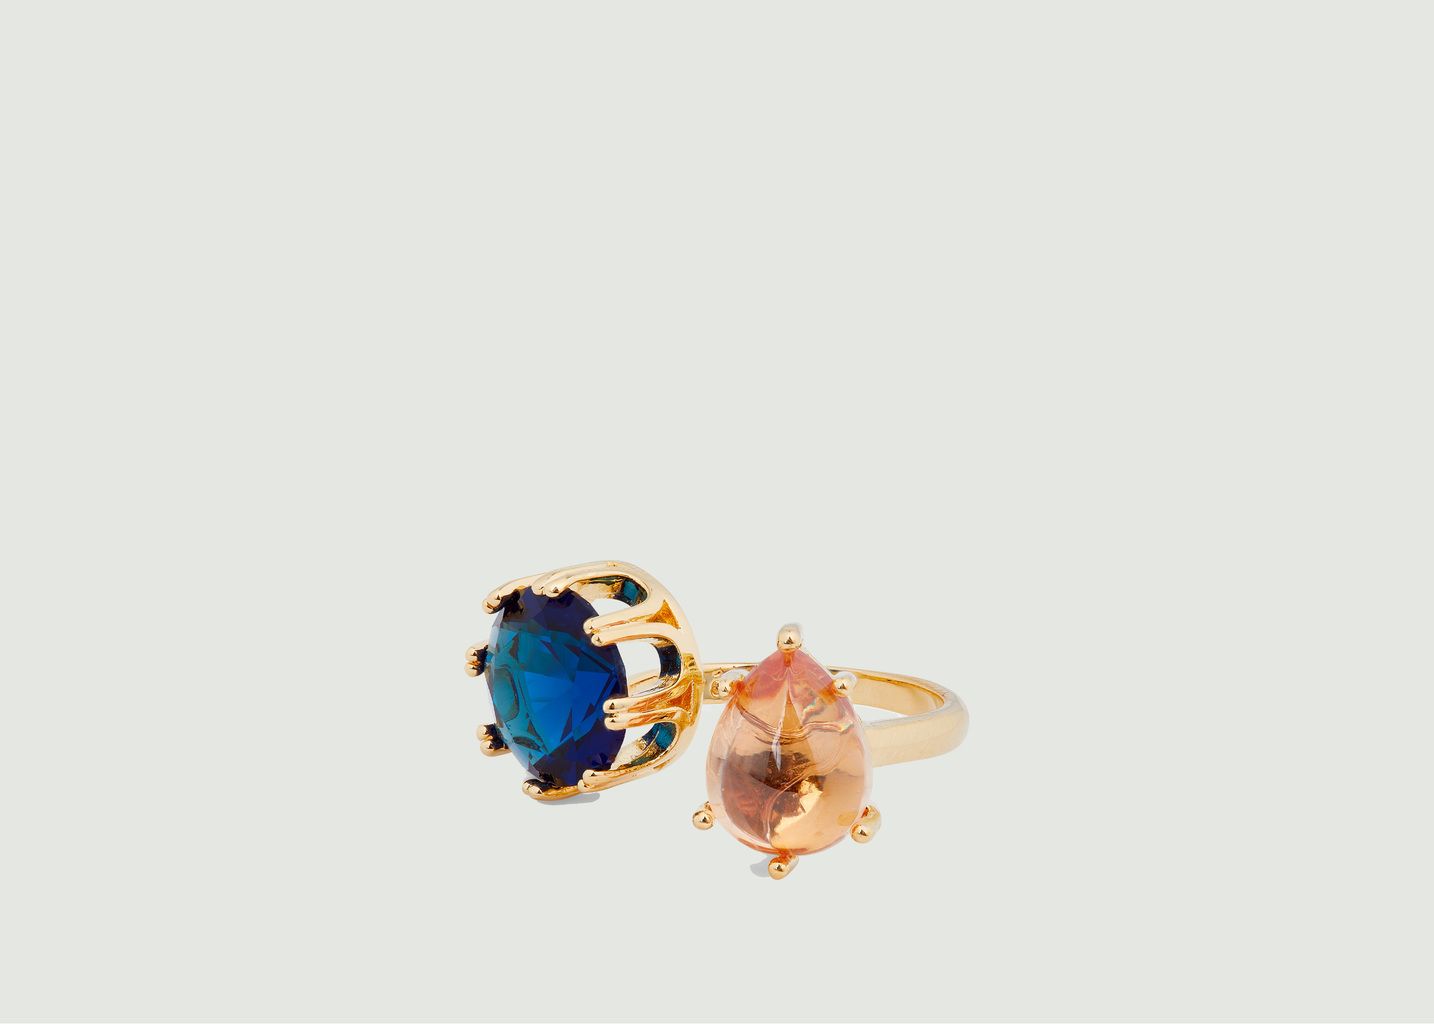 Adjustable ring with You and Me Colorama stones - Les Néréides